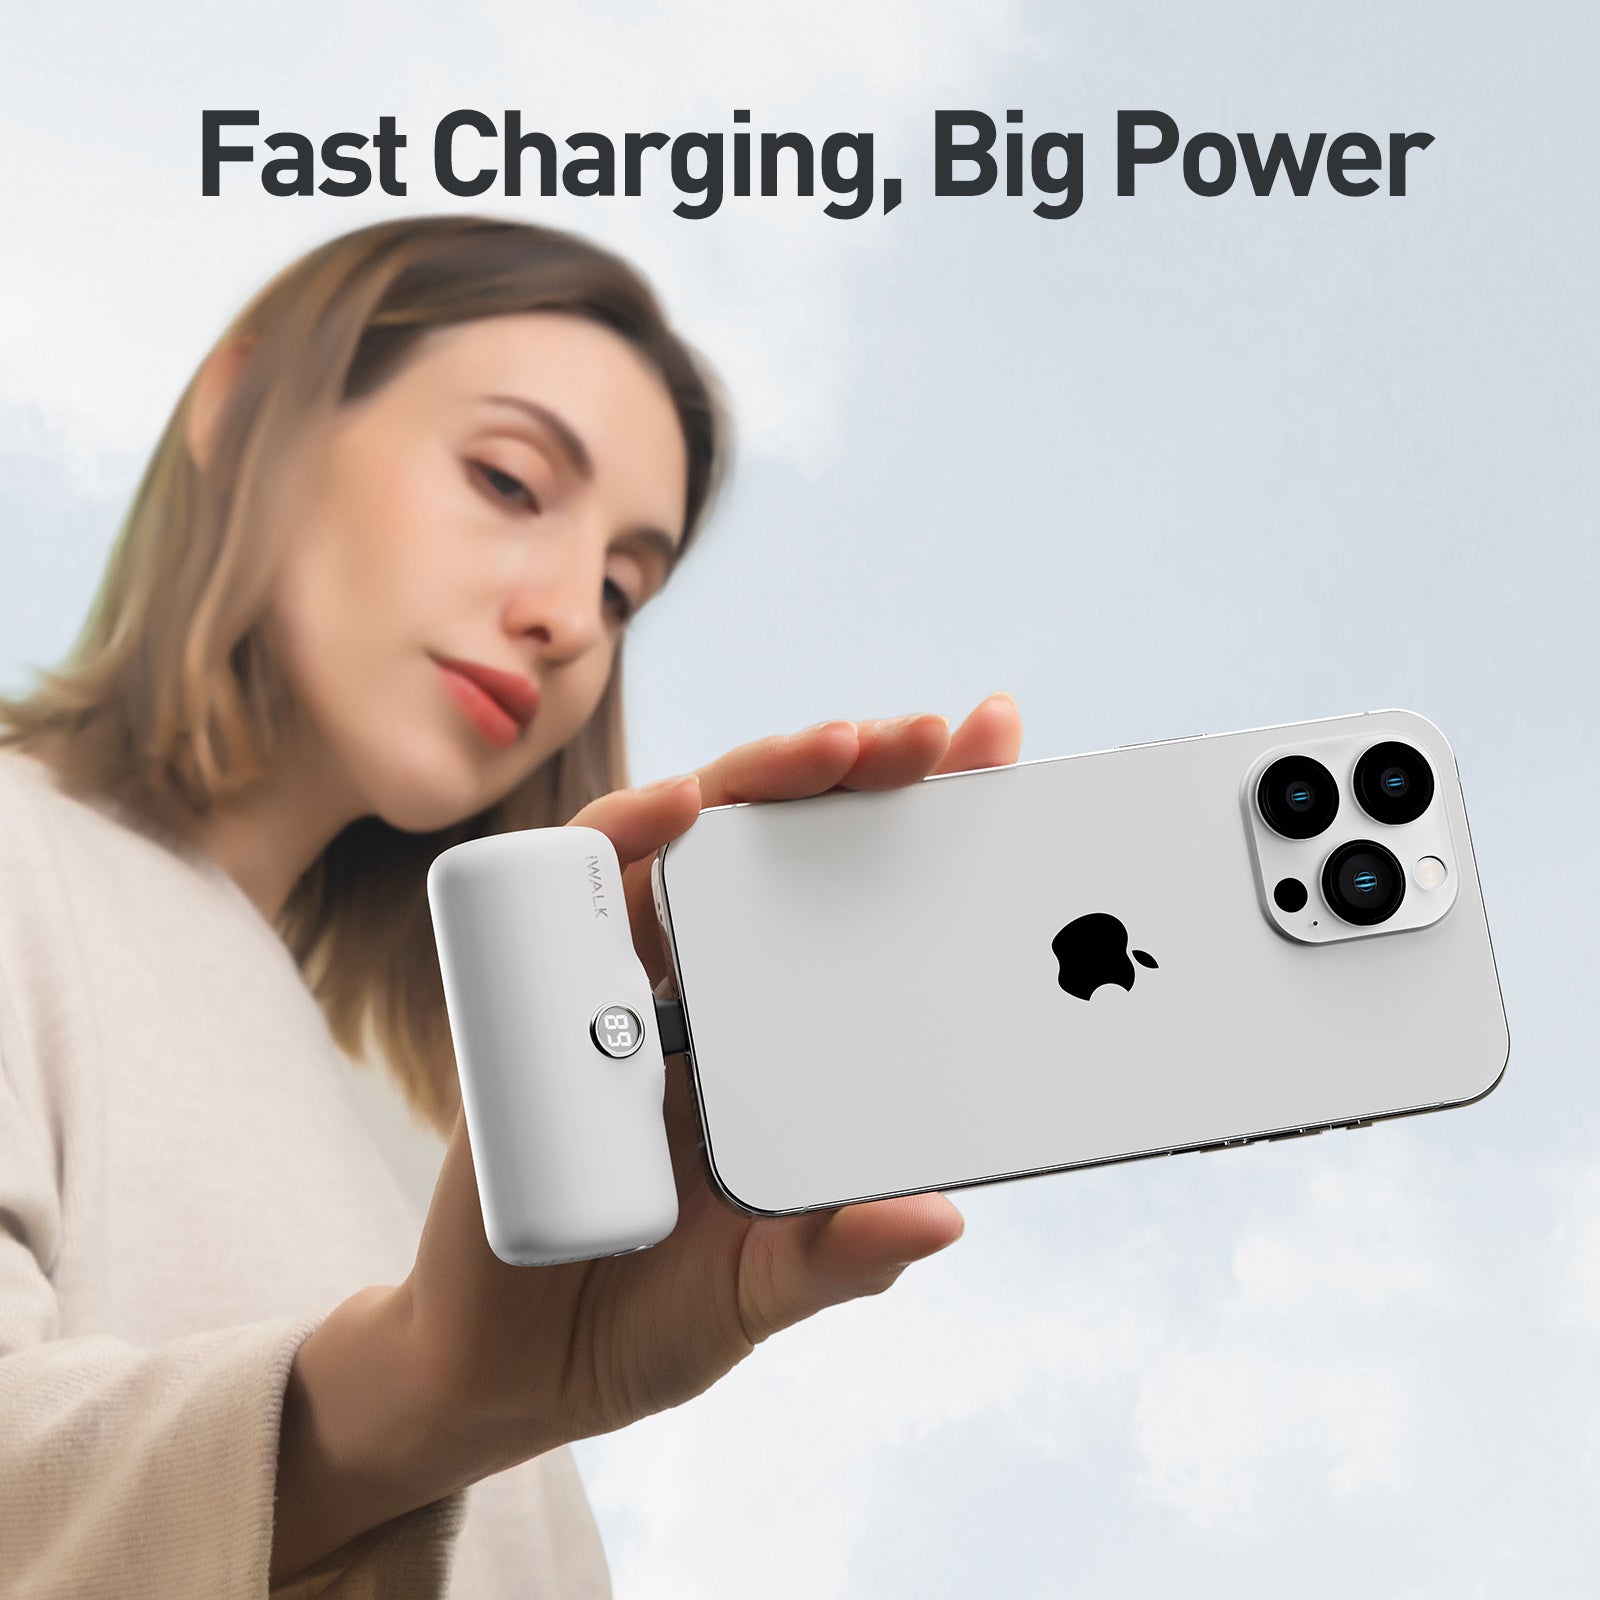 iWalk Linkme Pro Fast Charge 4800mAh Pocket Battery With Battery Display For iPhone - White